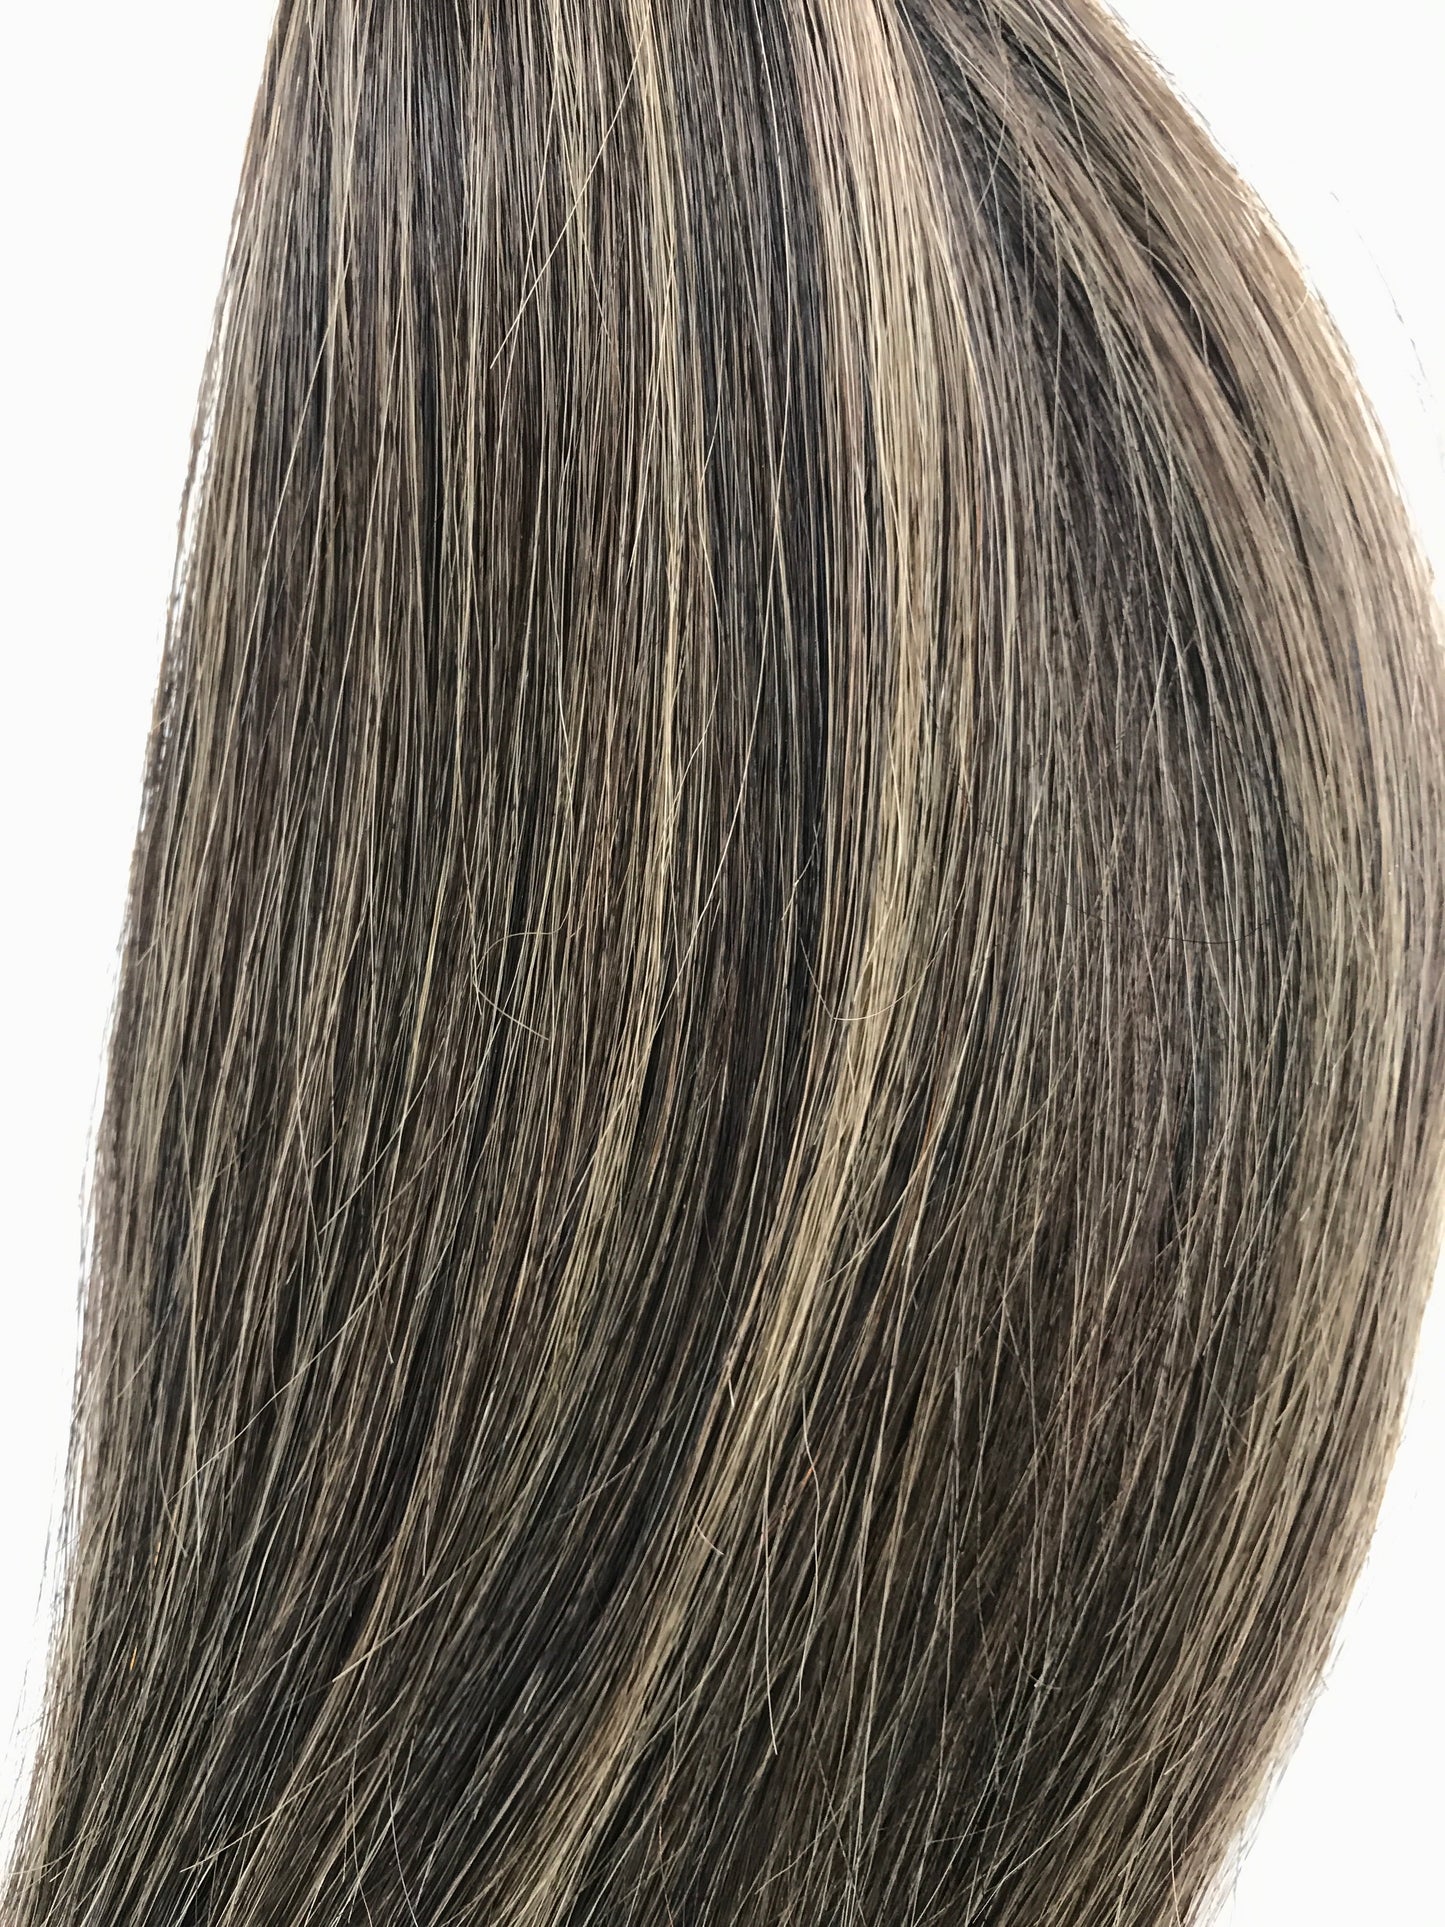 Russian Remy Human Hair, 0.7g i-Tips , Bodywave, 16'',100g, Quick Shipping!